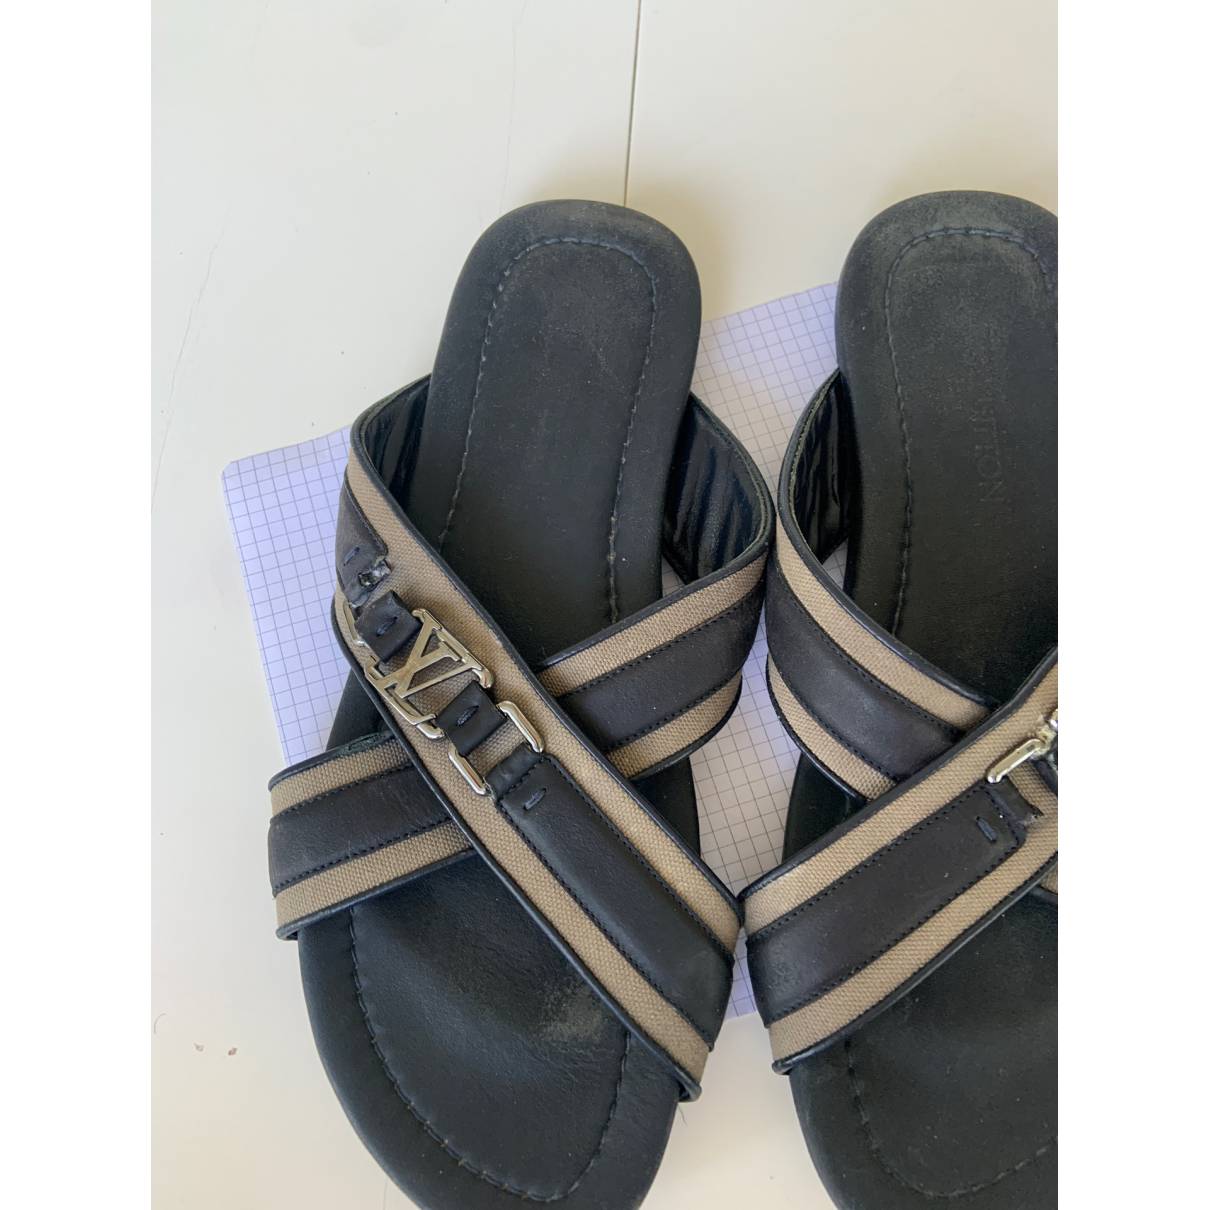 Leather sandals Louis Vuitton Black size 42 IT in Leather - 35877844